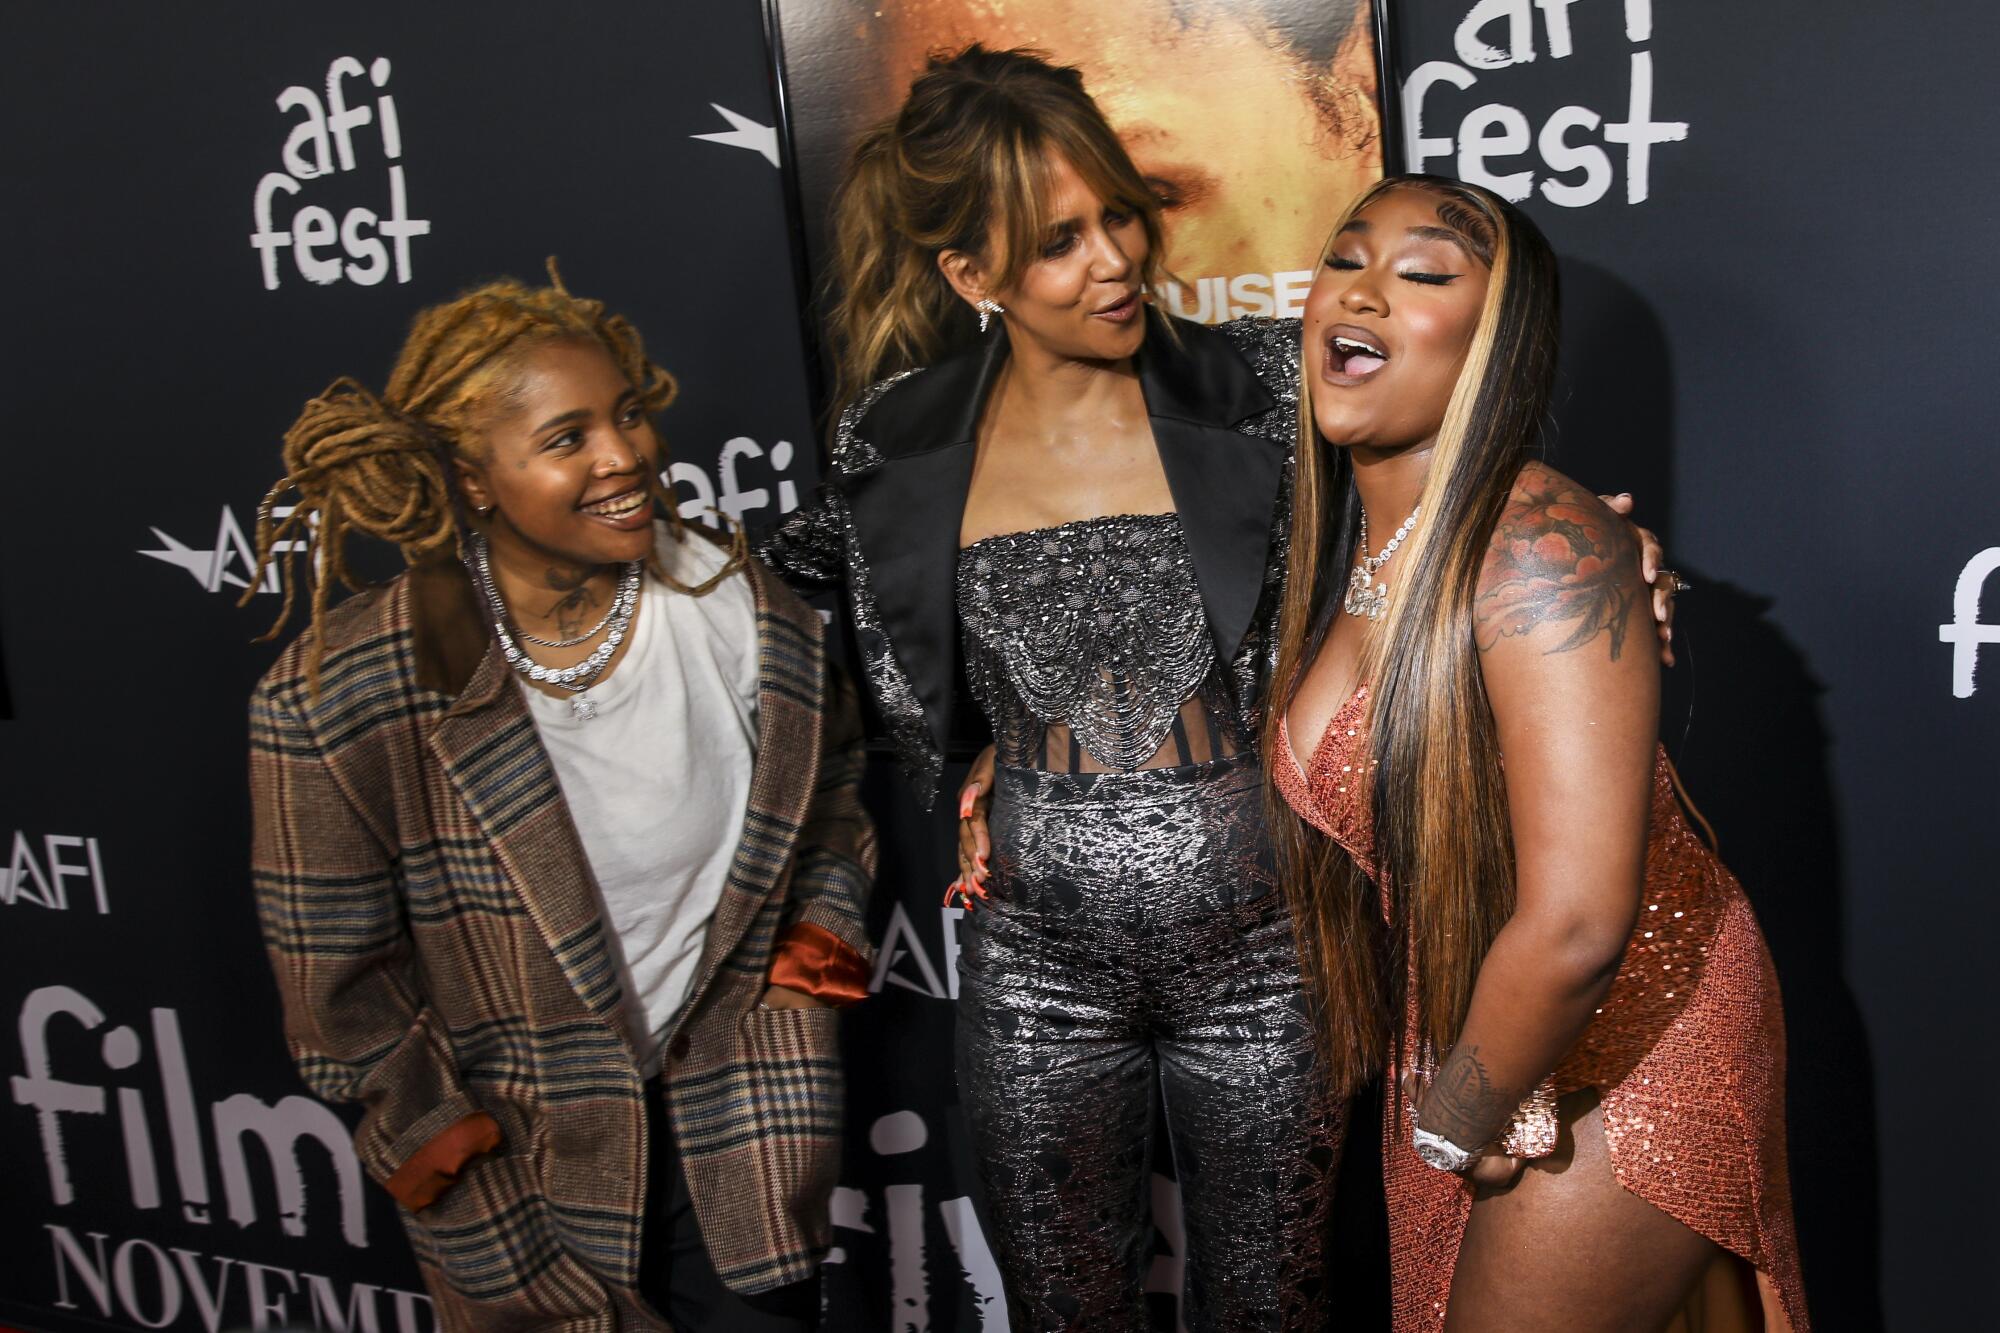 Halle Berry poses with Ambre and Erica Banks with a backdrop with AFI Fest logos.